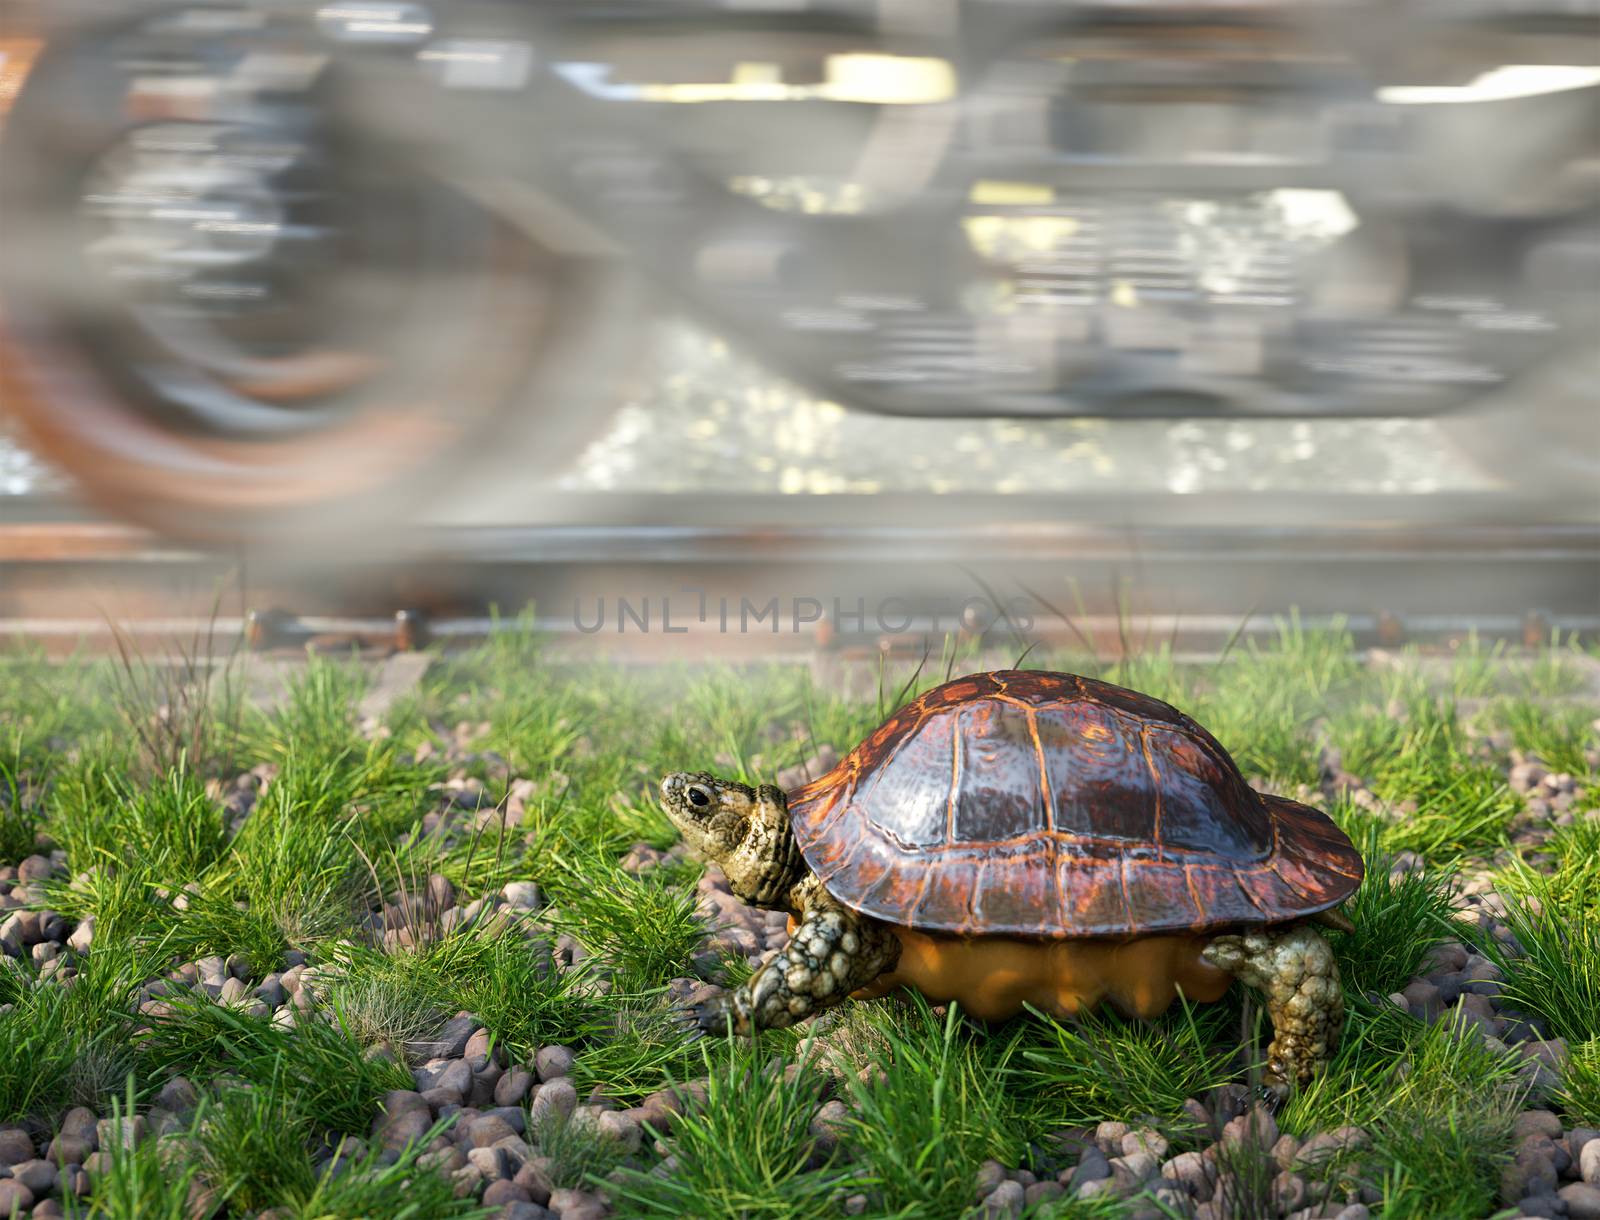 Who's faster. Railway track and train with running turtle. Travel technology concept